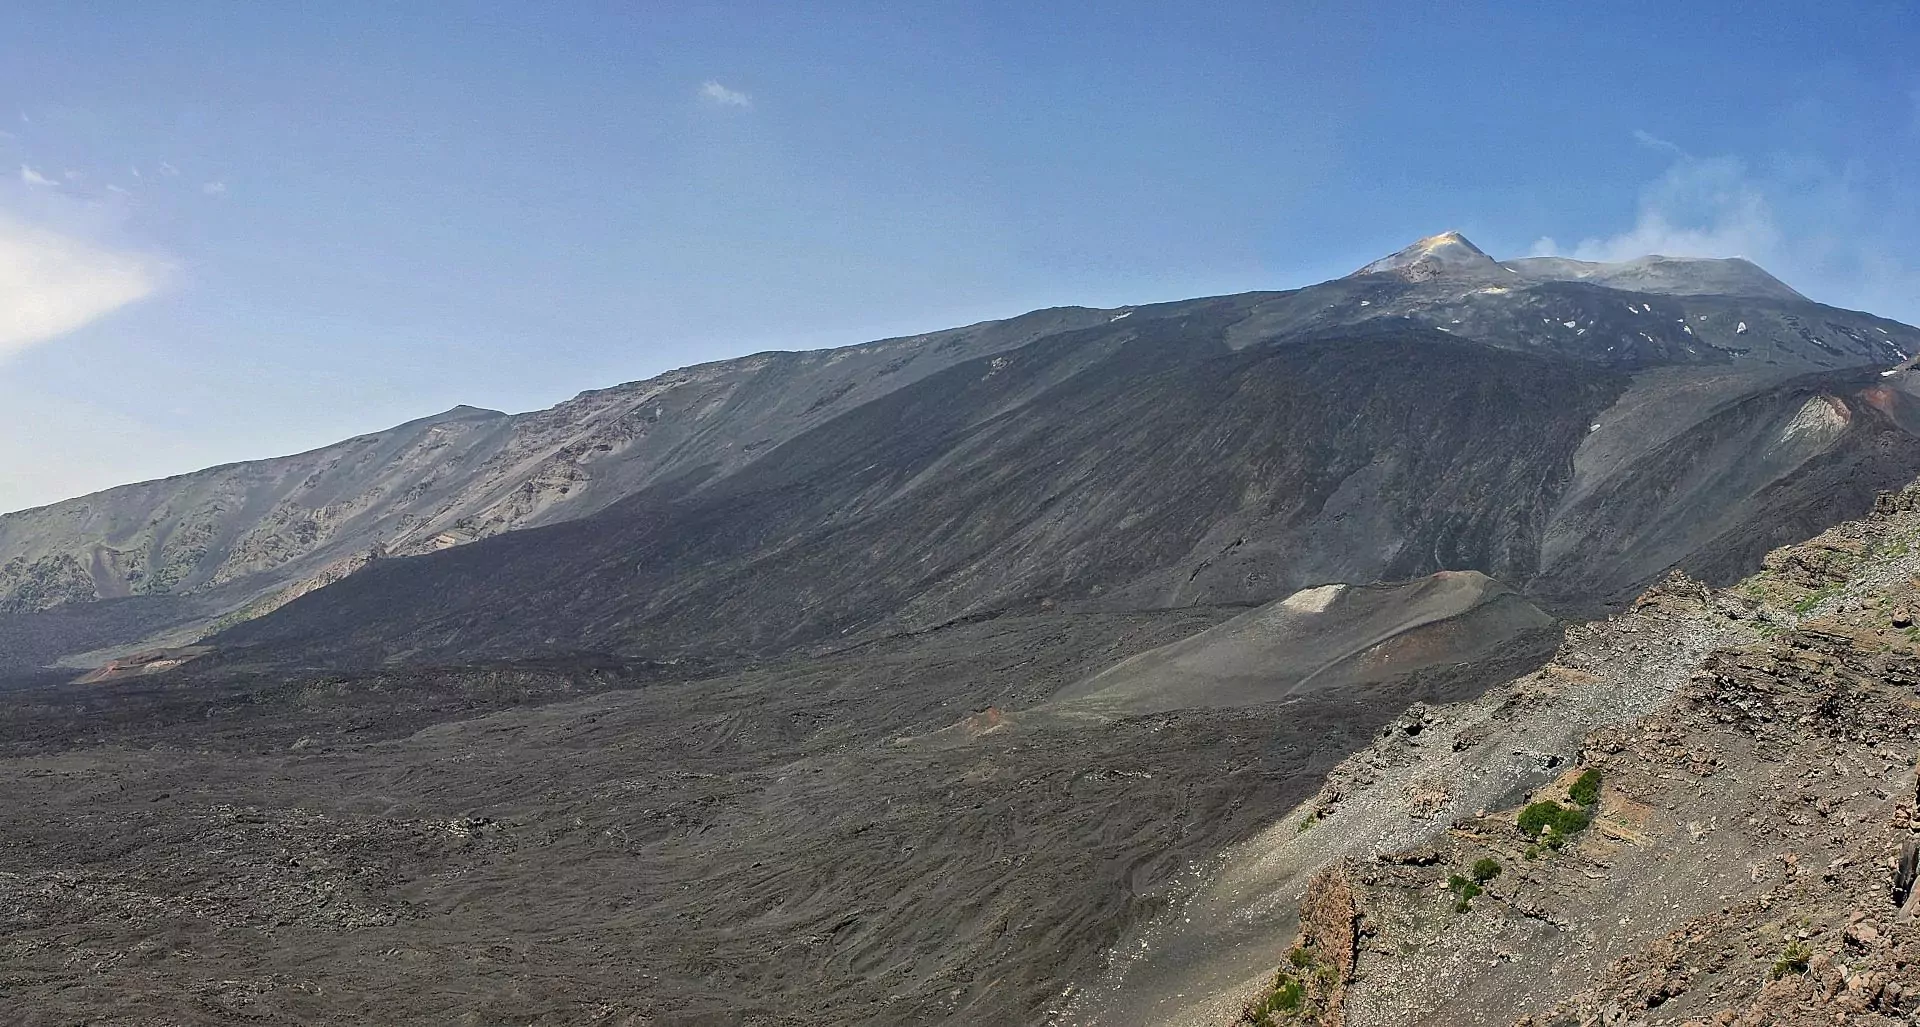 The Valle del Bove: a huge indentation on the eastern side of Etna, created by the collapse of the former summit